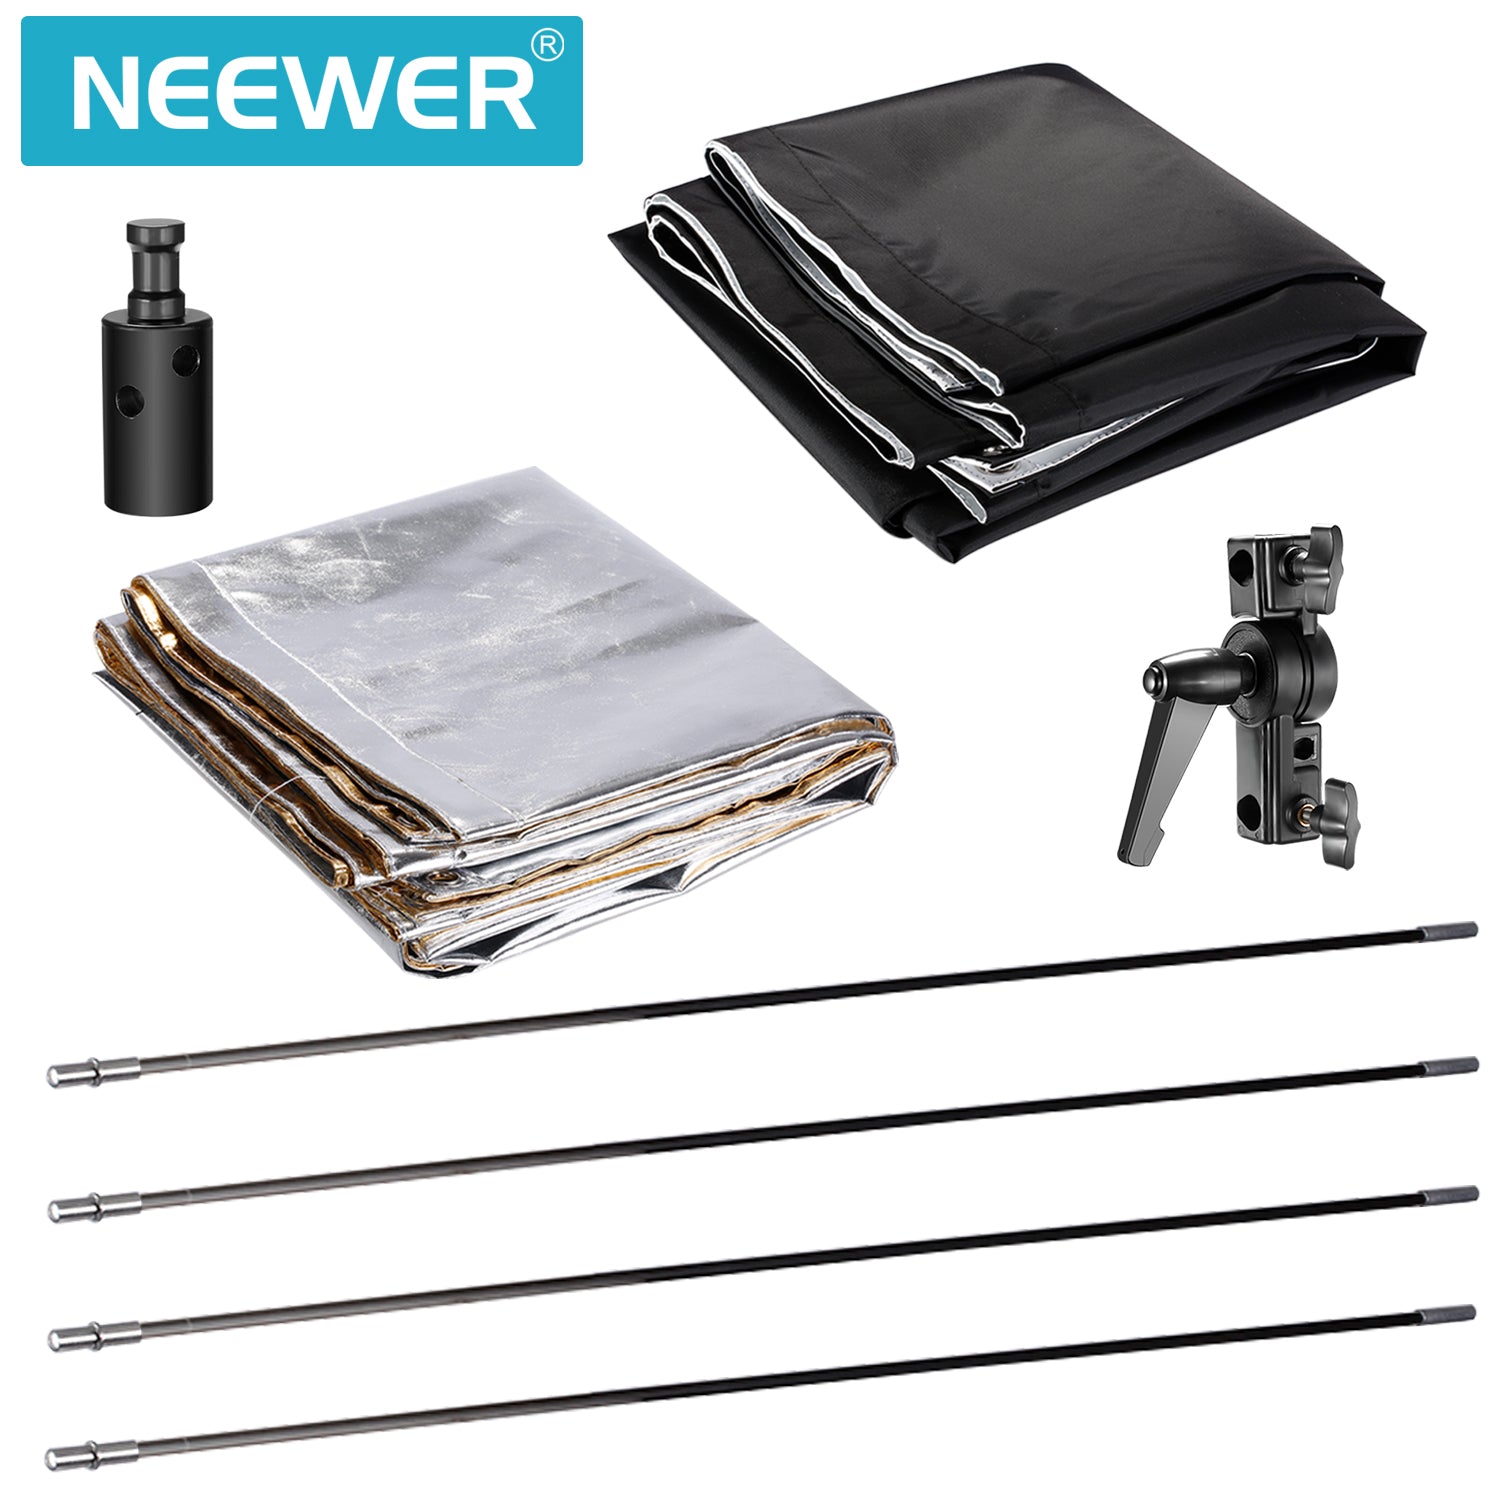 Neewer 90 x 180cm Gold/Silver Light Reflector with Carrying Bag - neewer.com